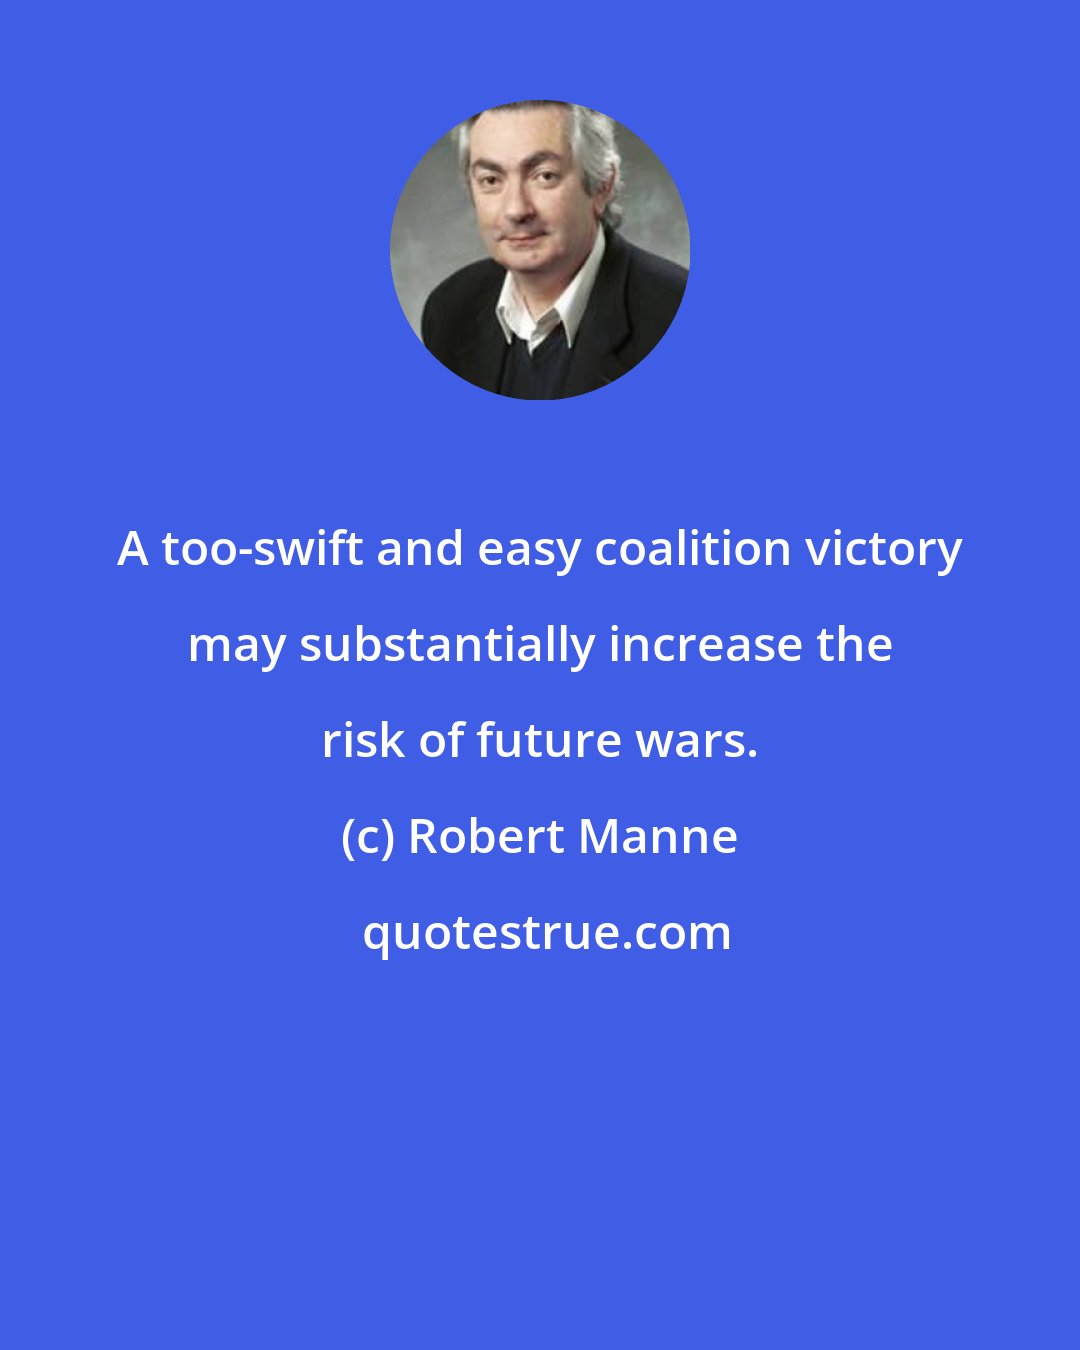 Robert Manne: A too-swift and easy coalition victory may substantially increase the risk of future wars.